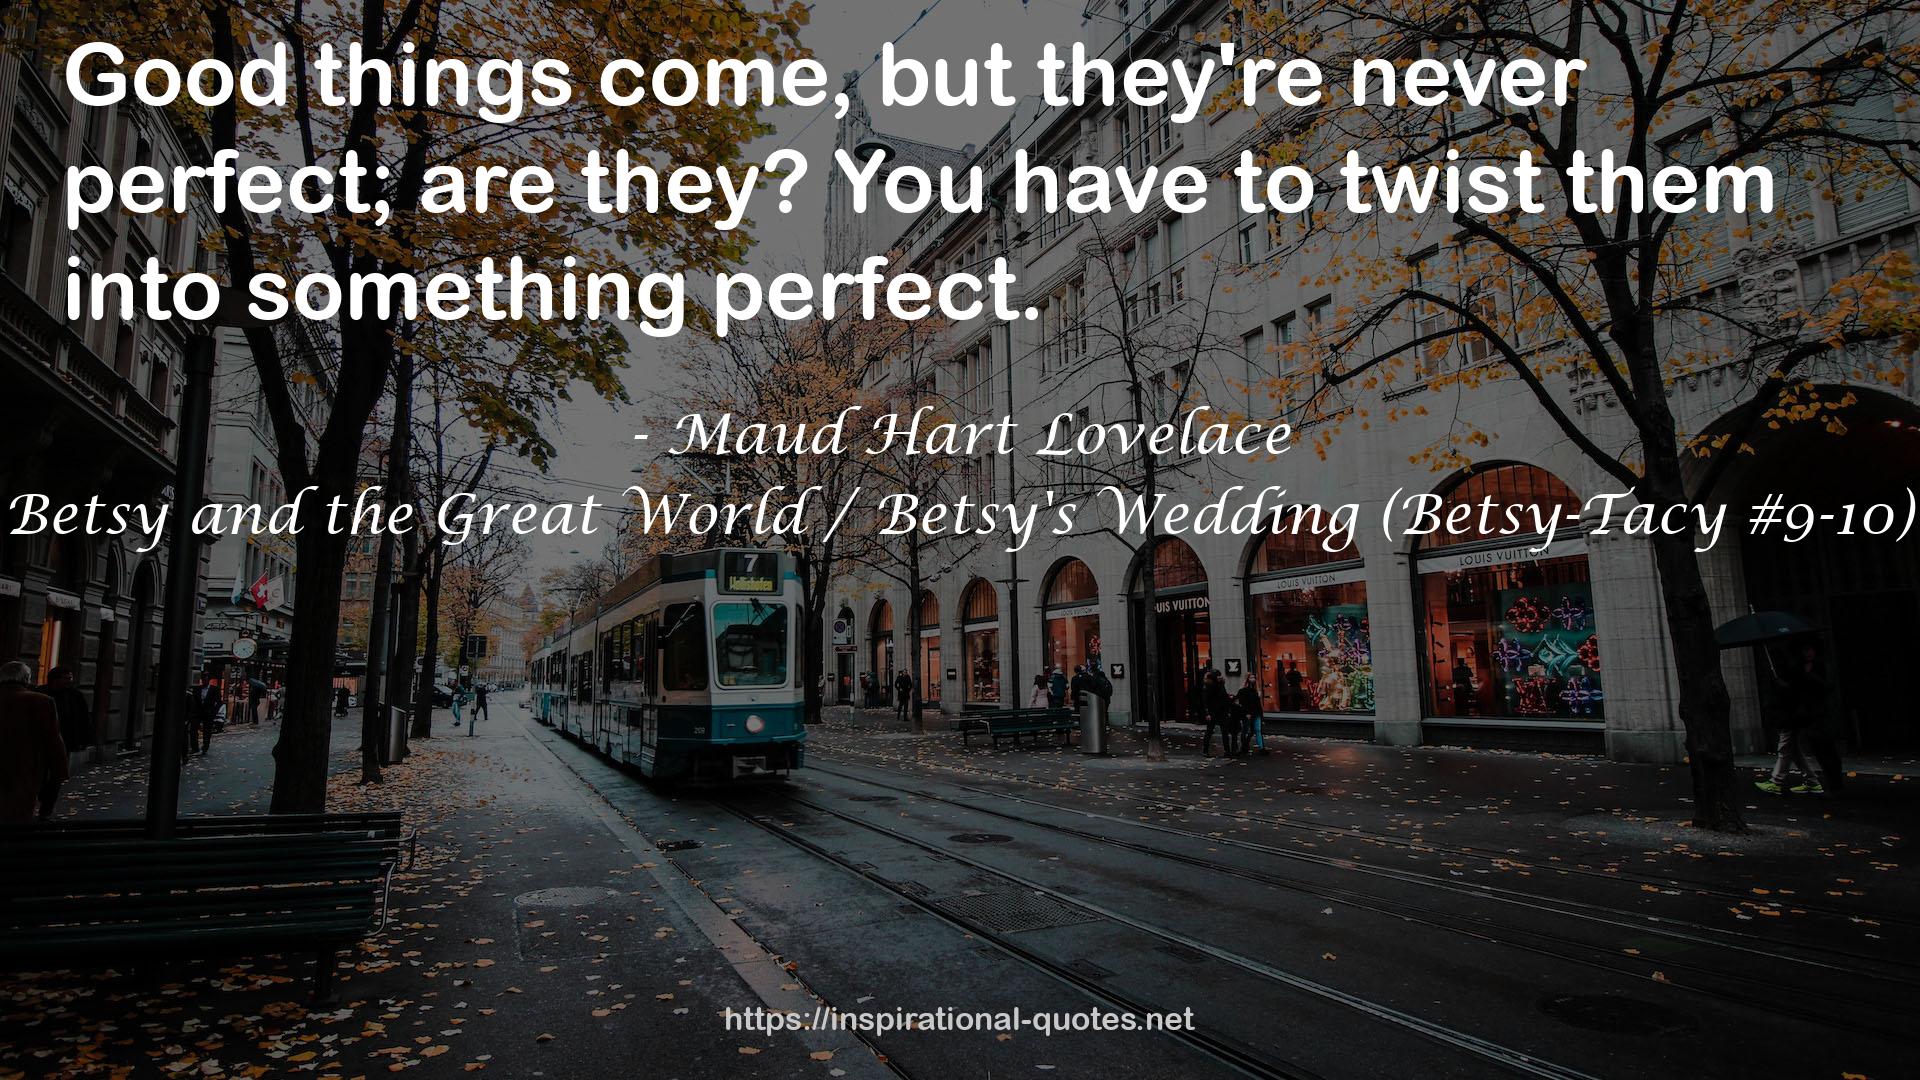 Betsy and the Great World / Betsy's Wedding (Betsy-Tacy #9-10) QUOTES